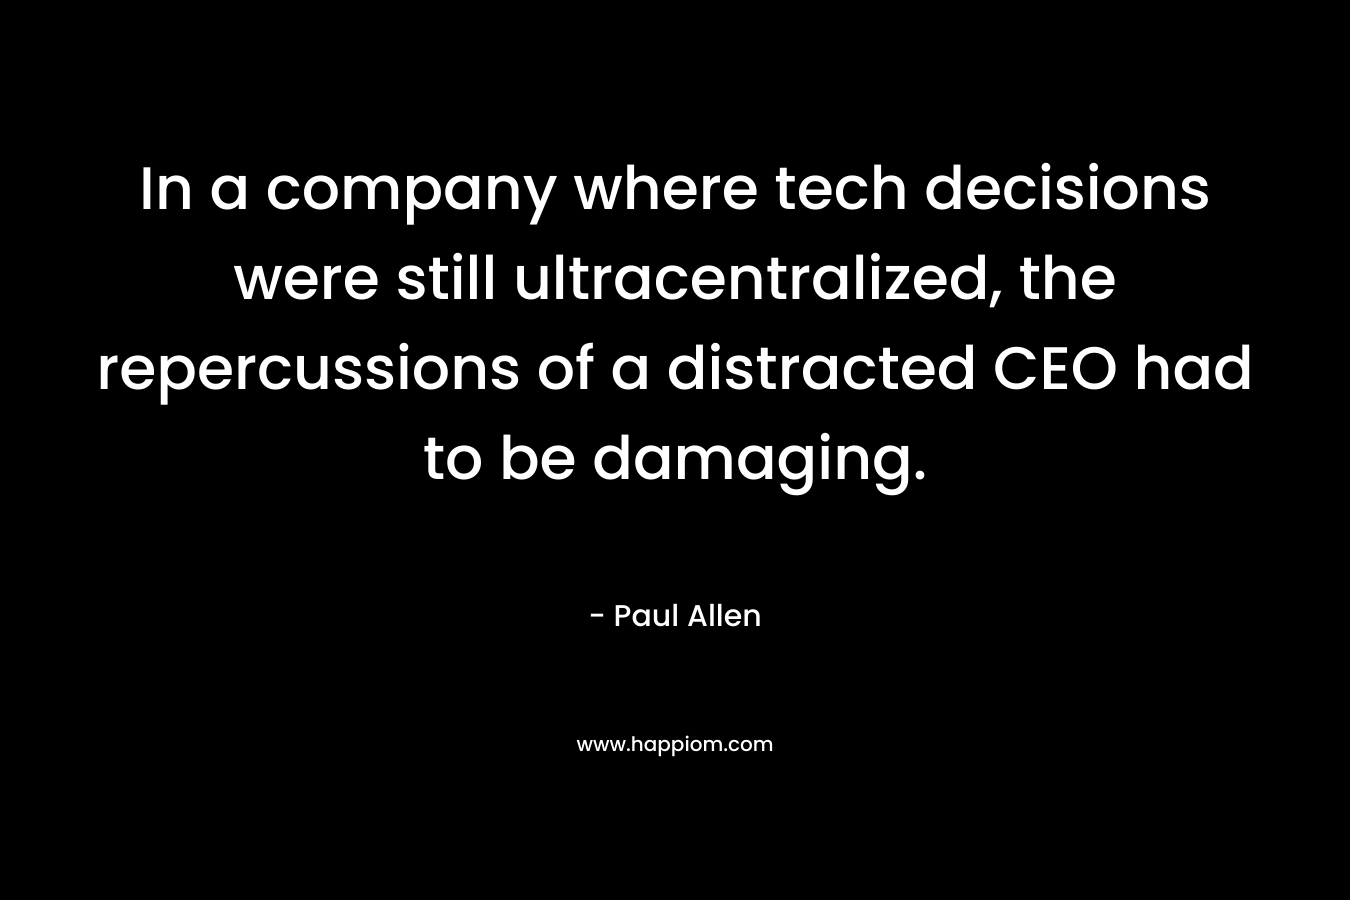 In a company where tech decisions were still ultracentralized, the repercussions of a distracted CEO had to be damaging.